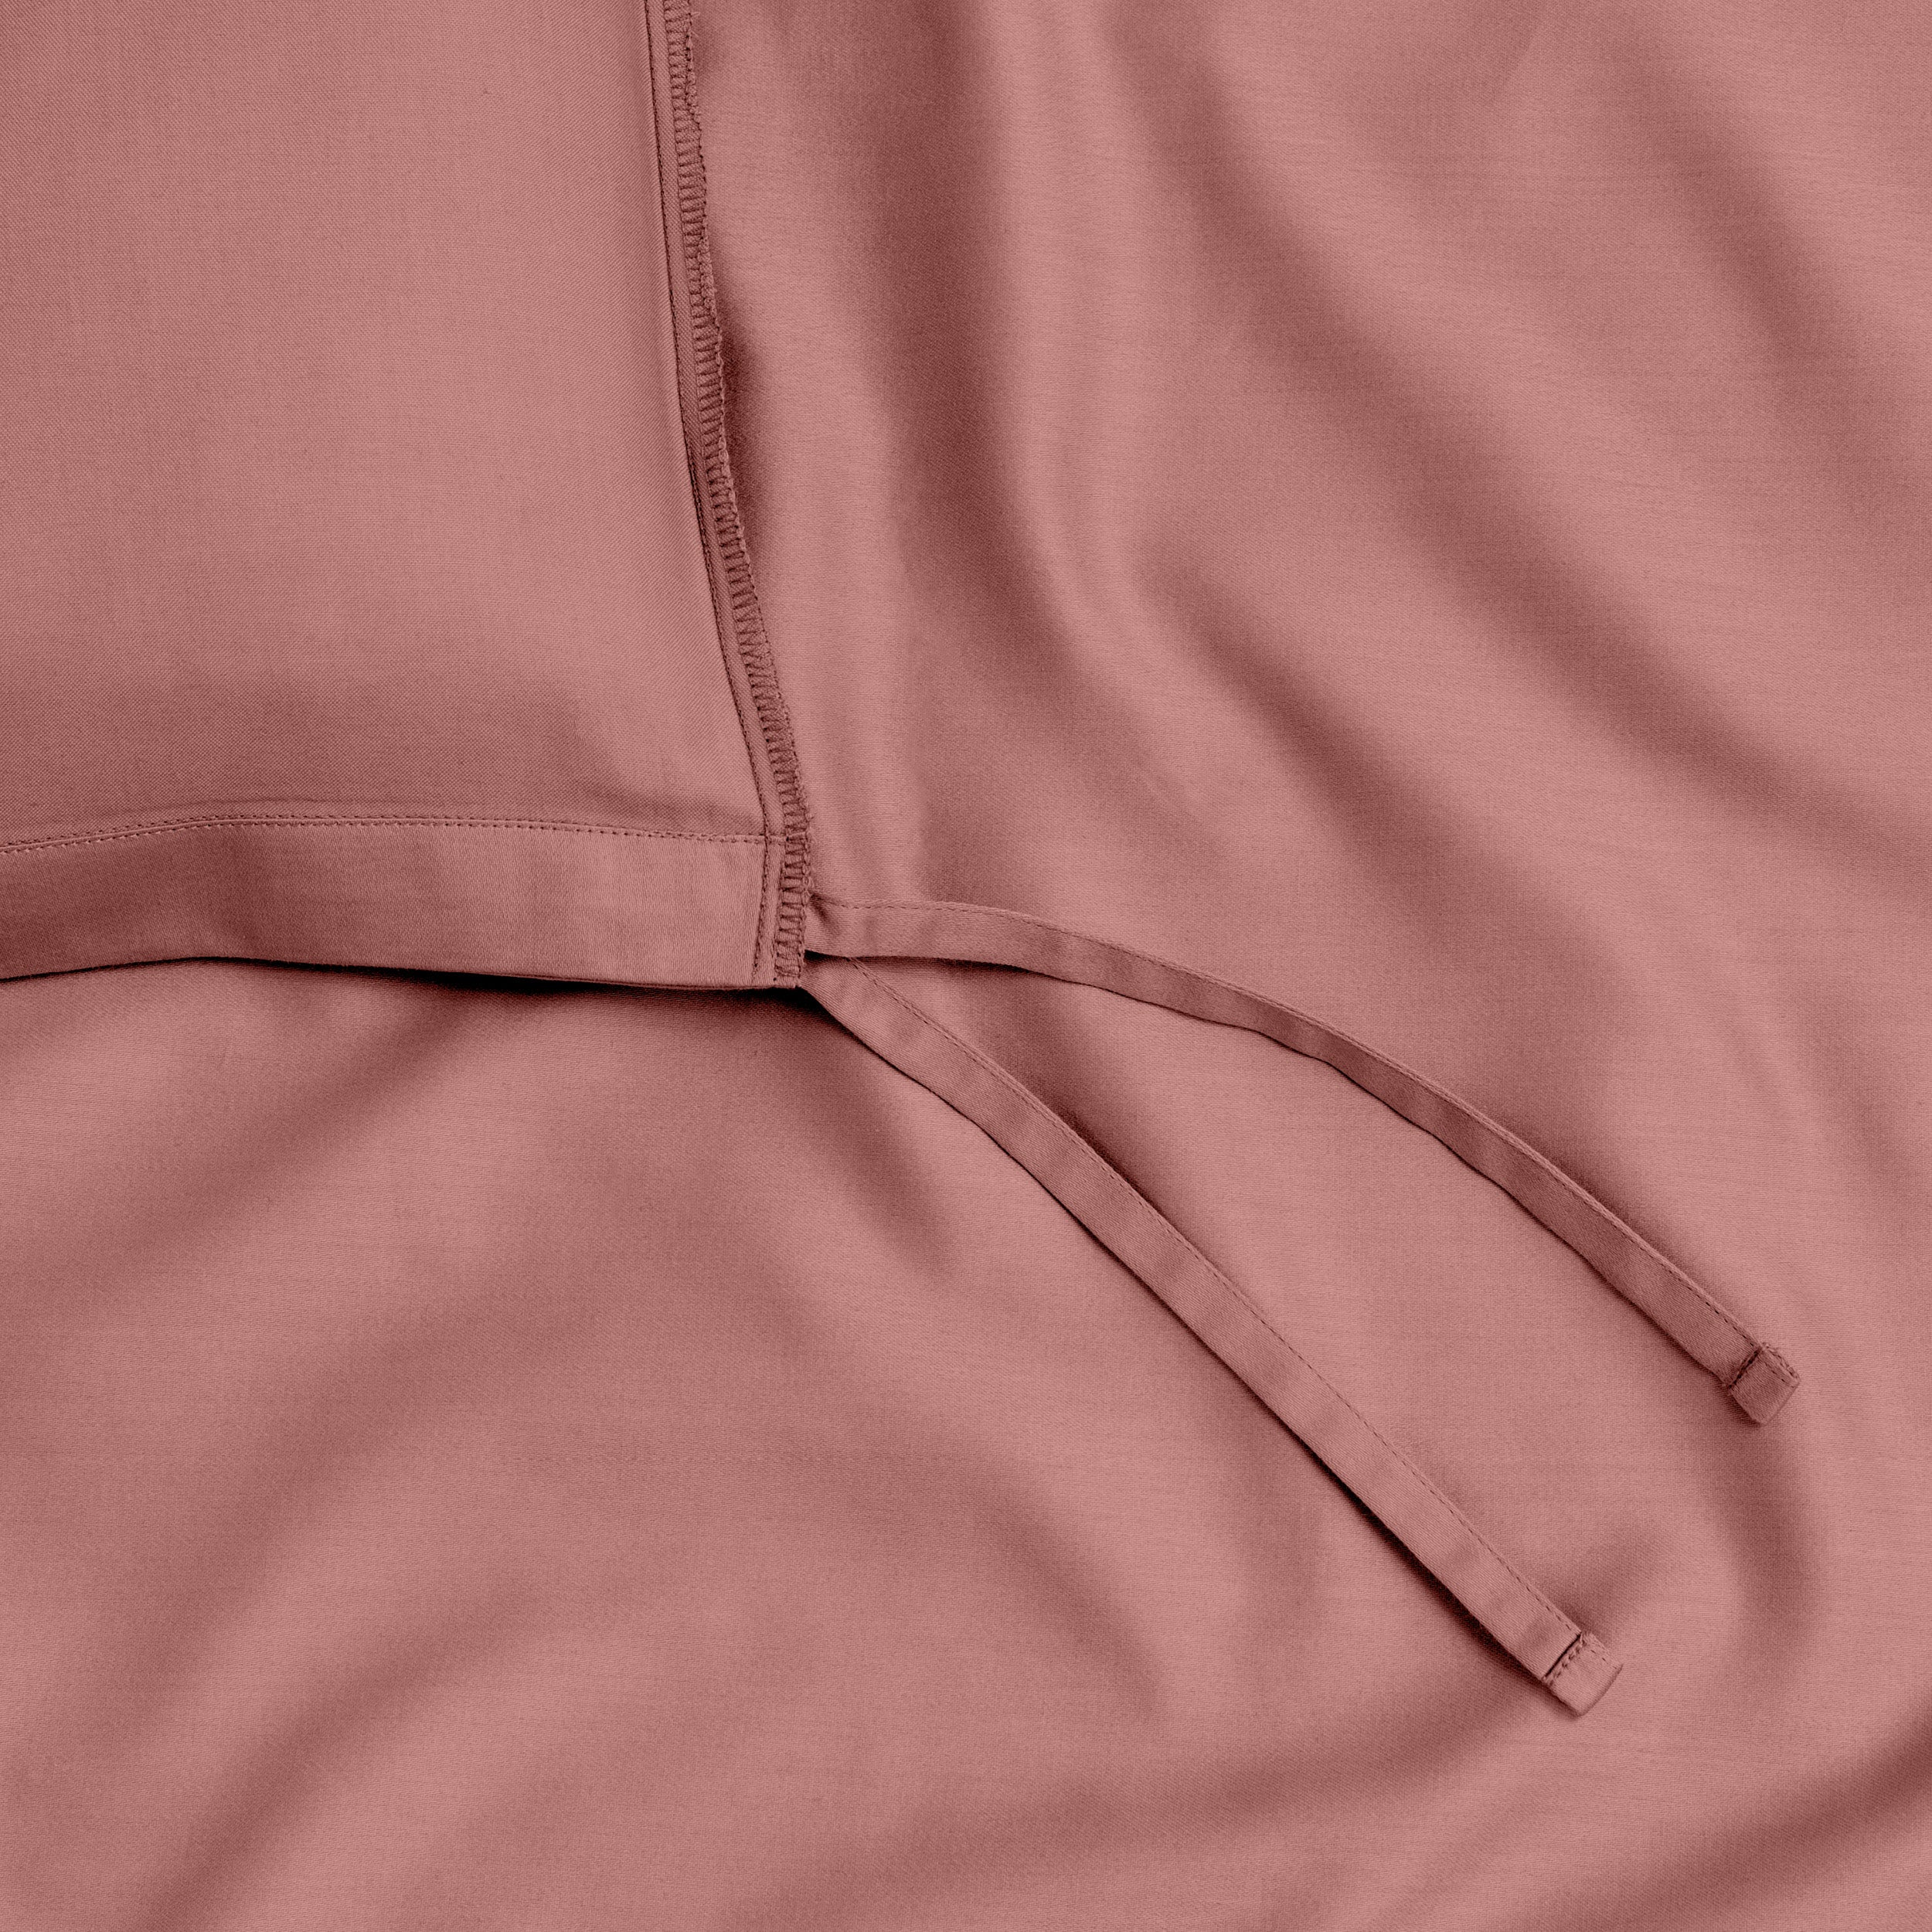 A close view of the tie corner and texture of the duvet cover.